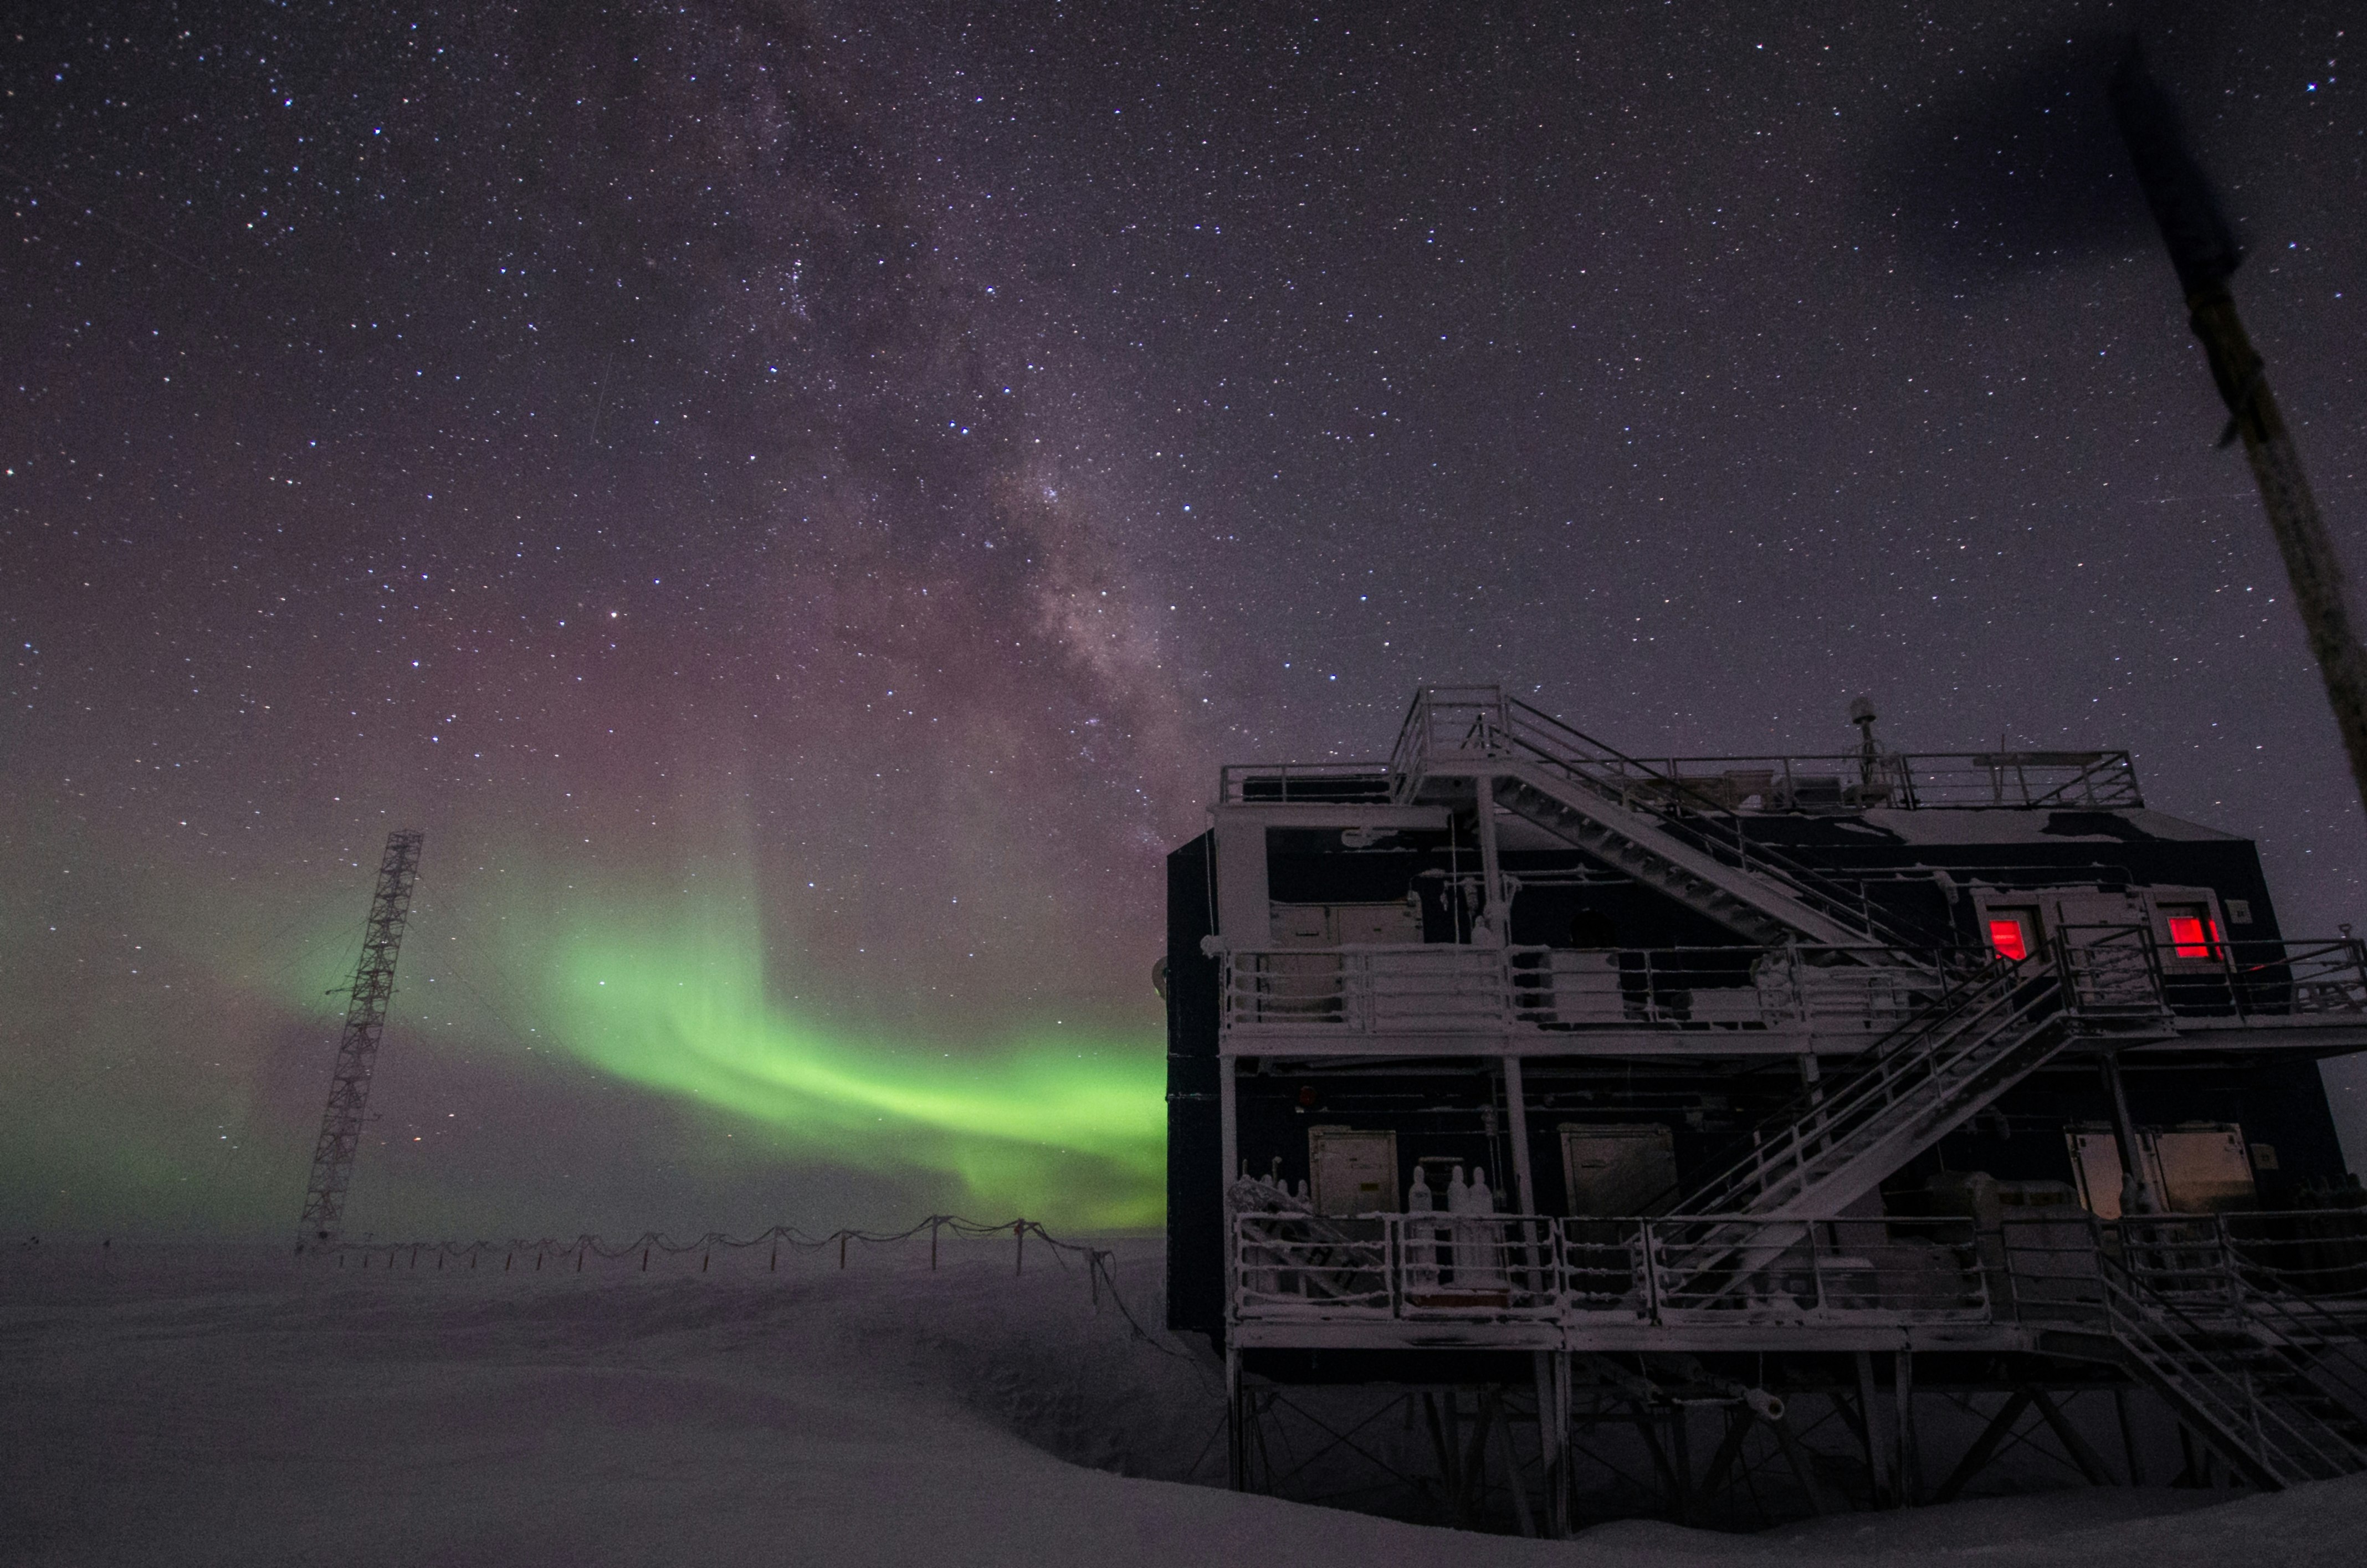 Aurora australis and Milky Way seen over NOAA Atmospheric Research Observatory